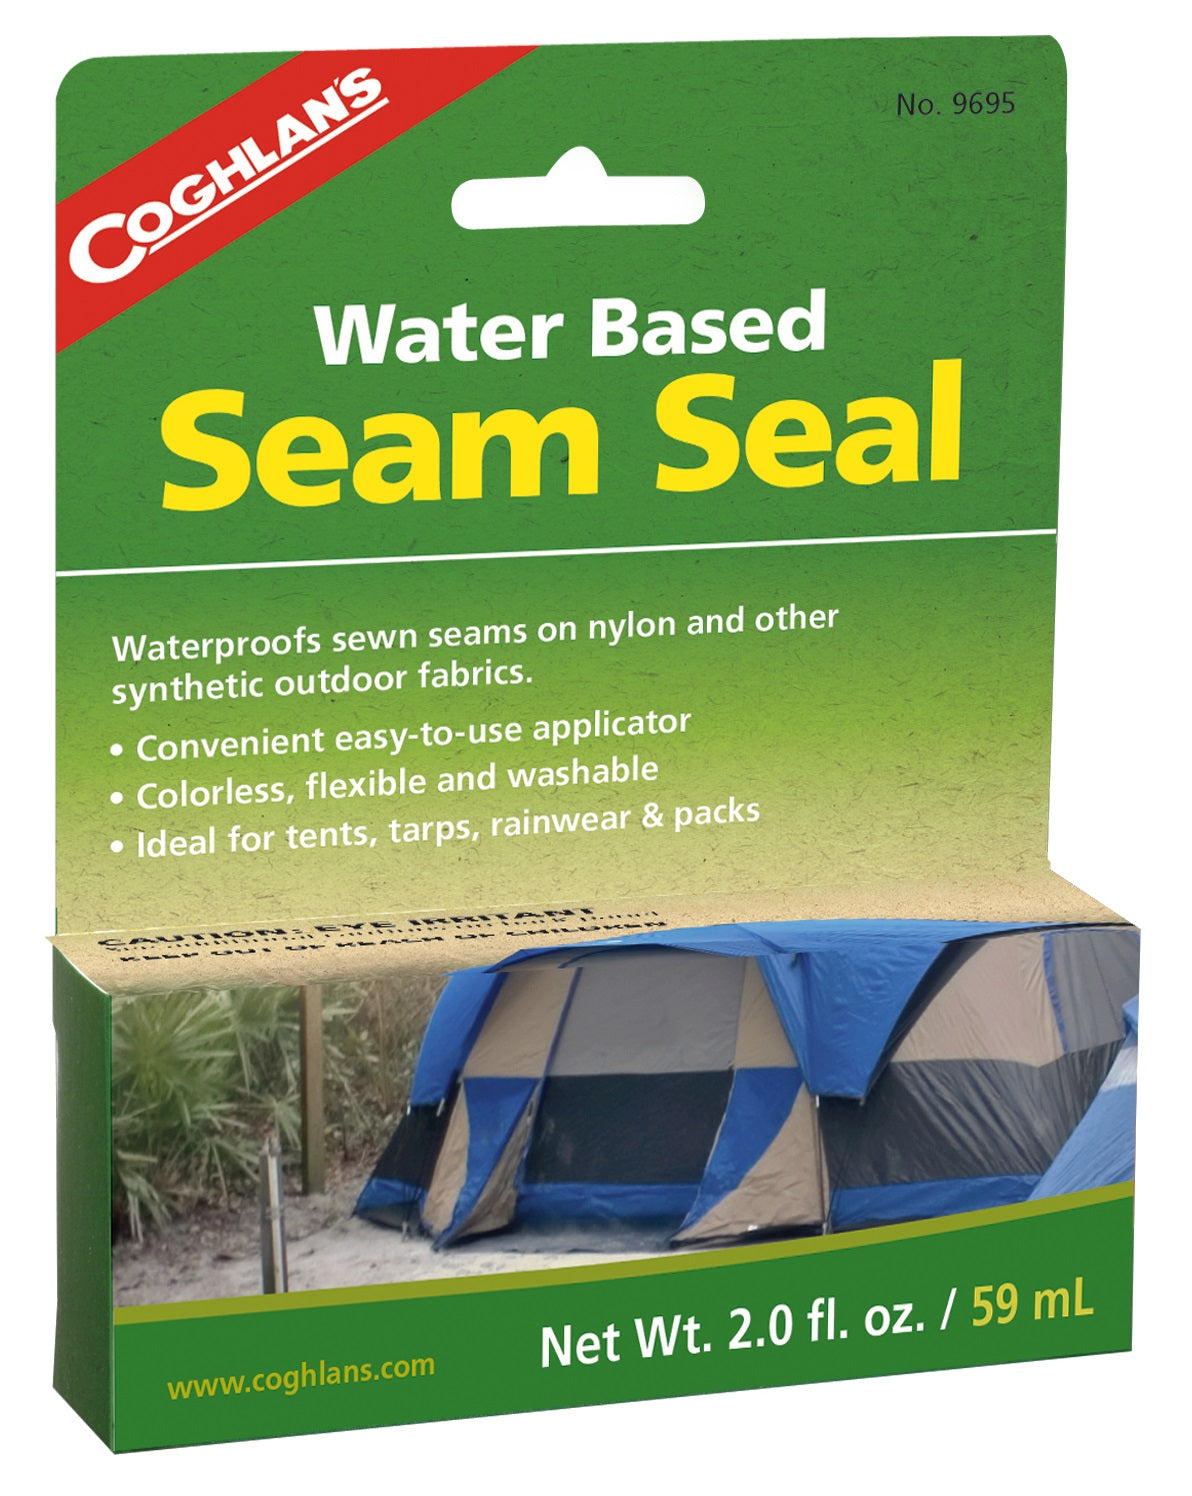 buy camping tents at cheap rate in bulk. wholesale & retail camping products & supplies store.